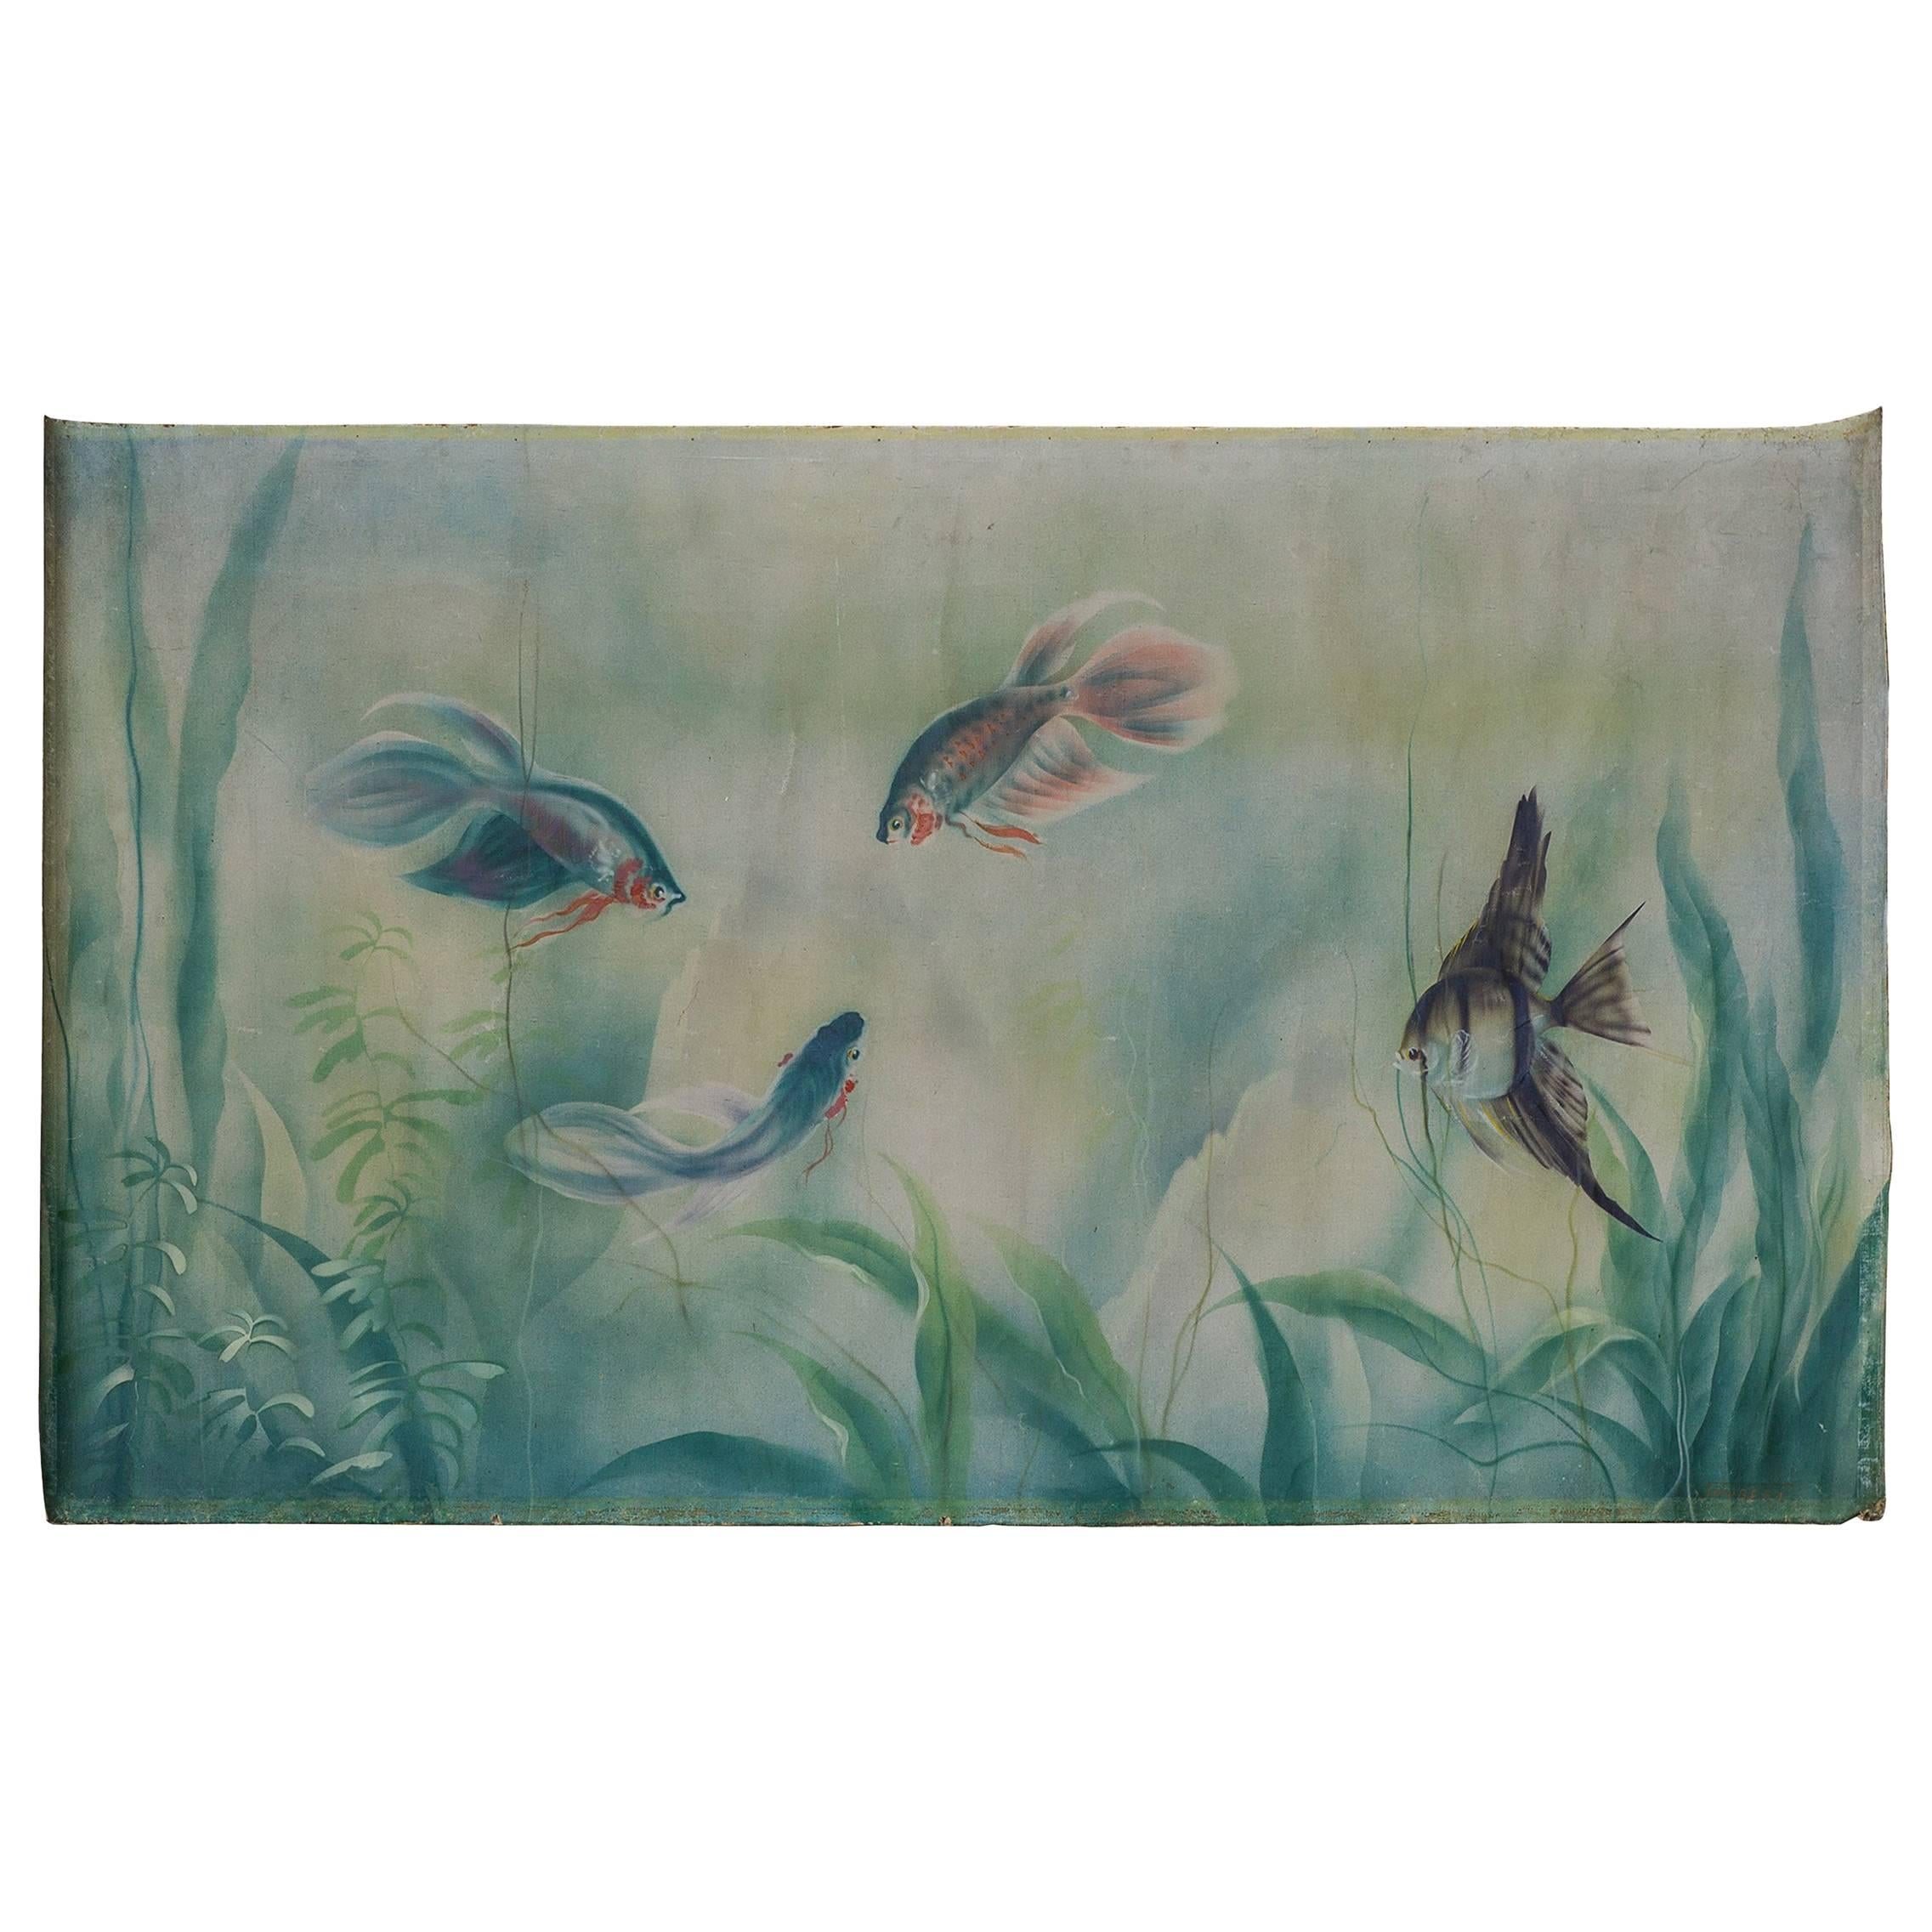  Marine Hand Painting with Fishes for a Beach House or a Bath